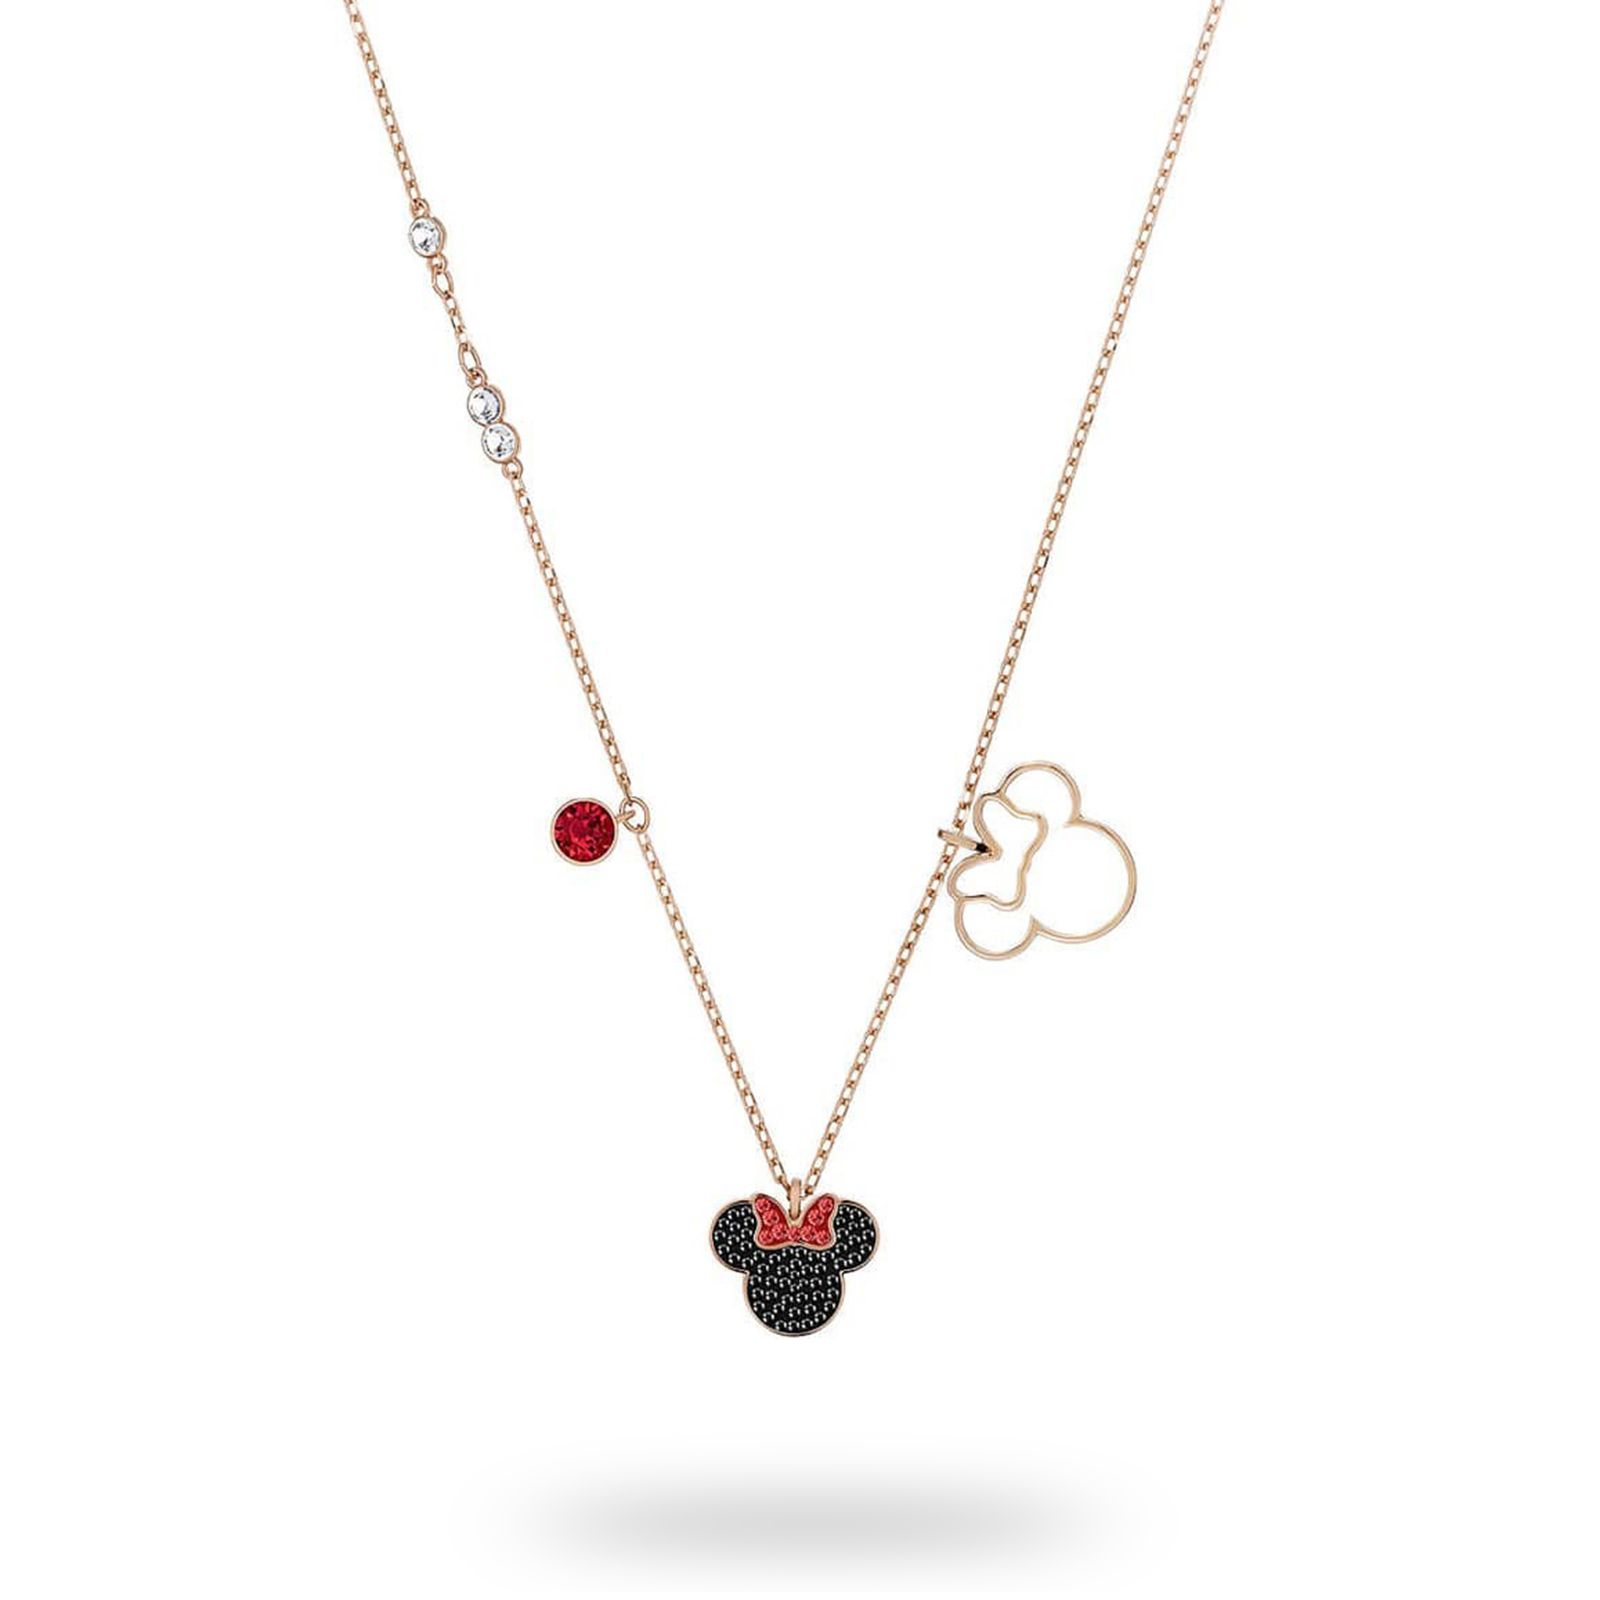 Swarovski Mickey And Minnie Rose Gold Plated Minnie Necklace With Regard To Most Current Disney Classic Mickey Pendant Necklaces (View 8 of 25)